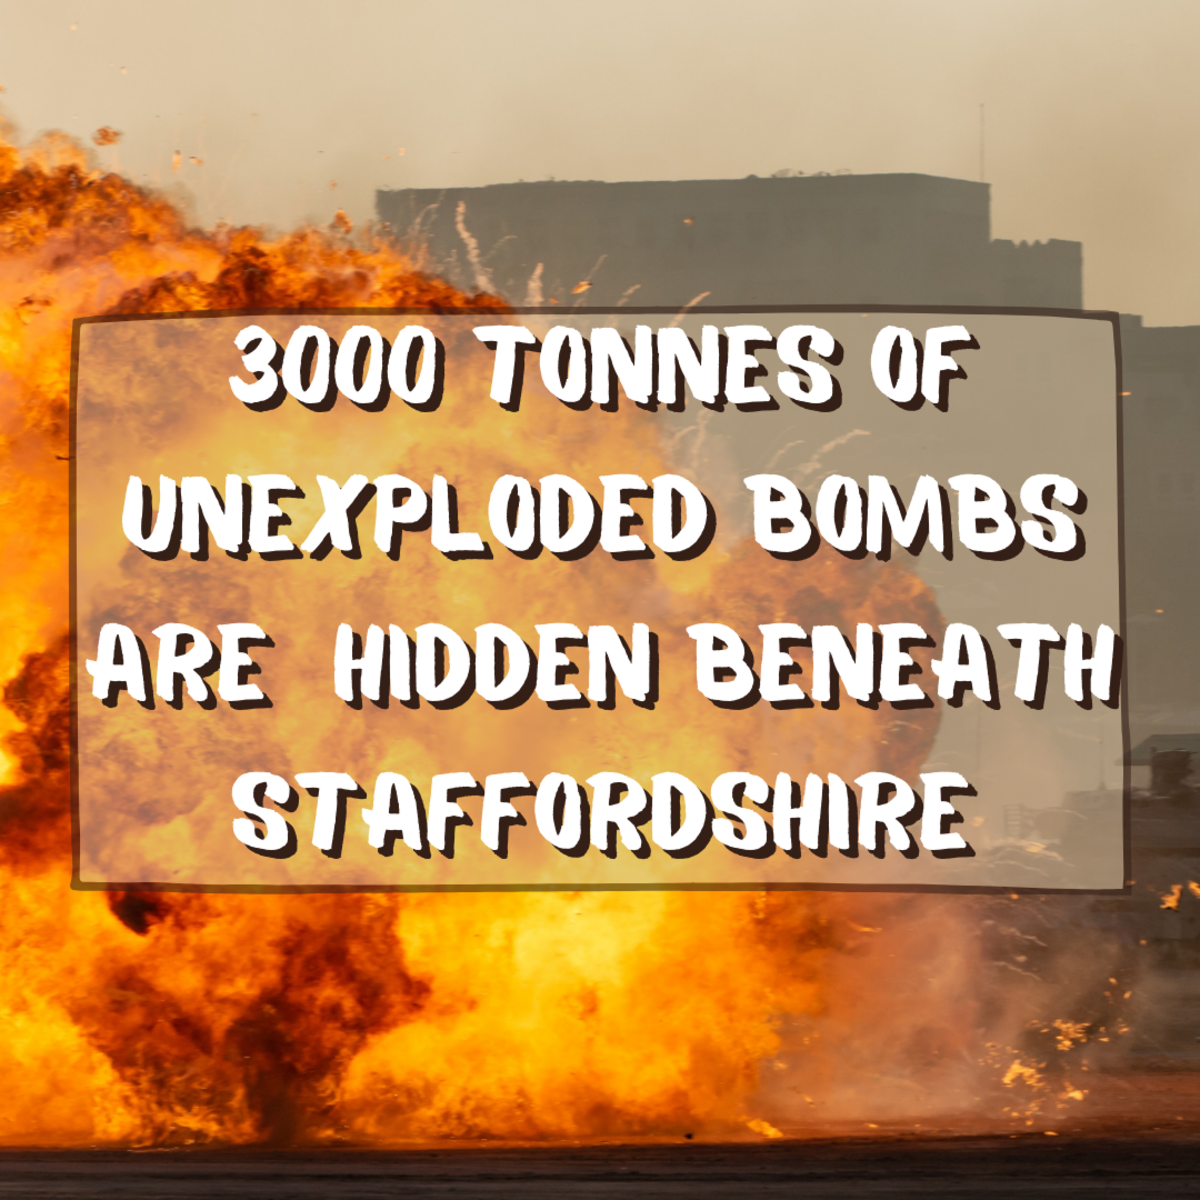 Believe it or not, there are 3,000 tonnes of unexploded bombs from World War 2 hidden under Staffordshire, England. Read on to learn more.